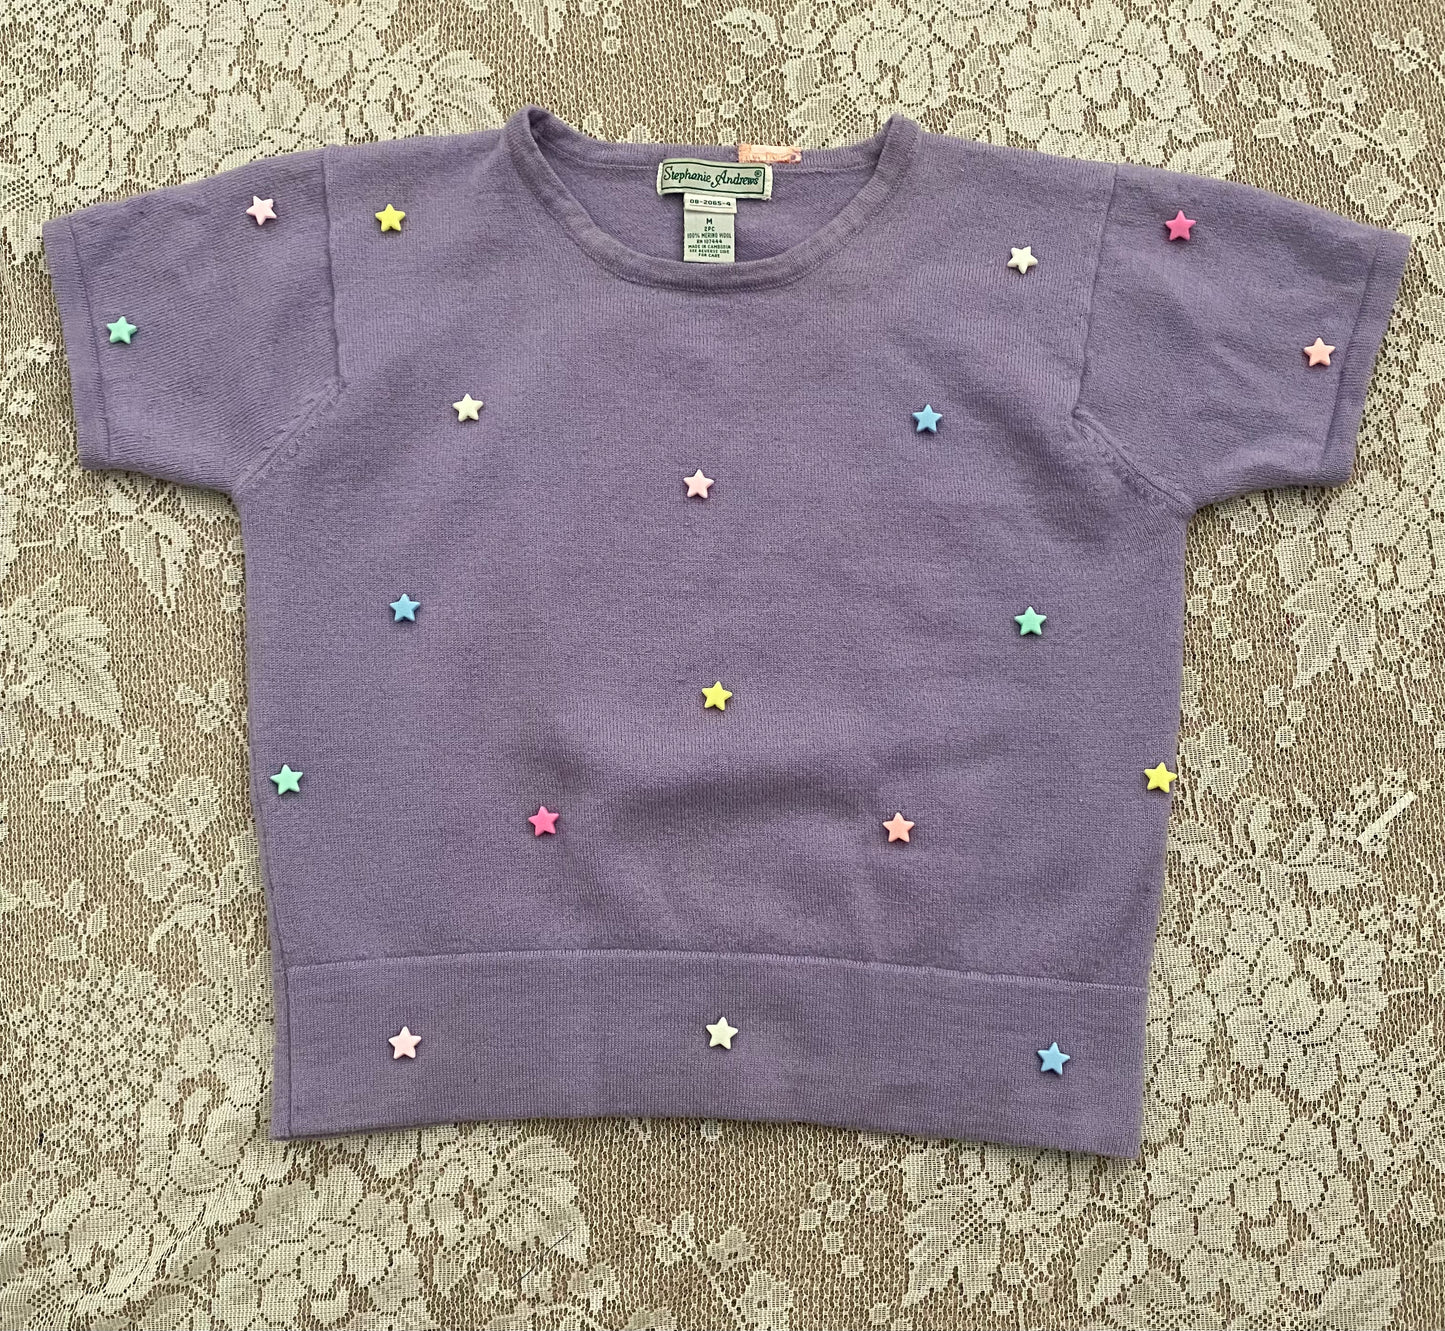 The Star Sweater